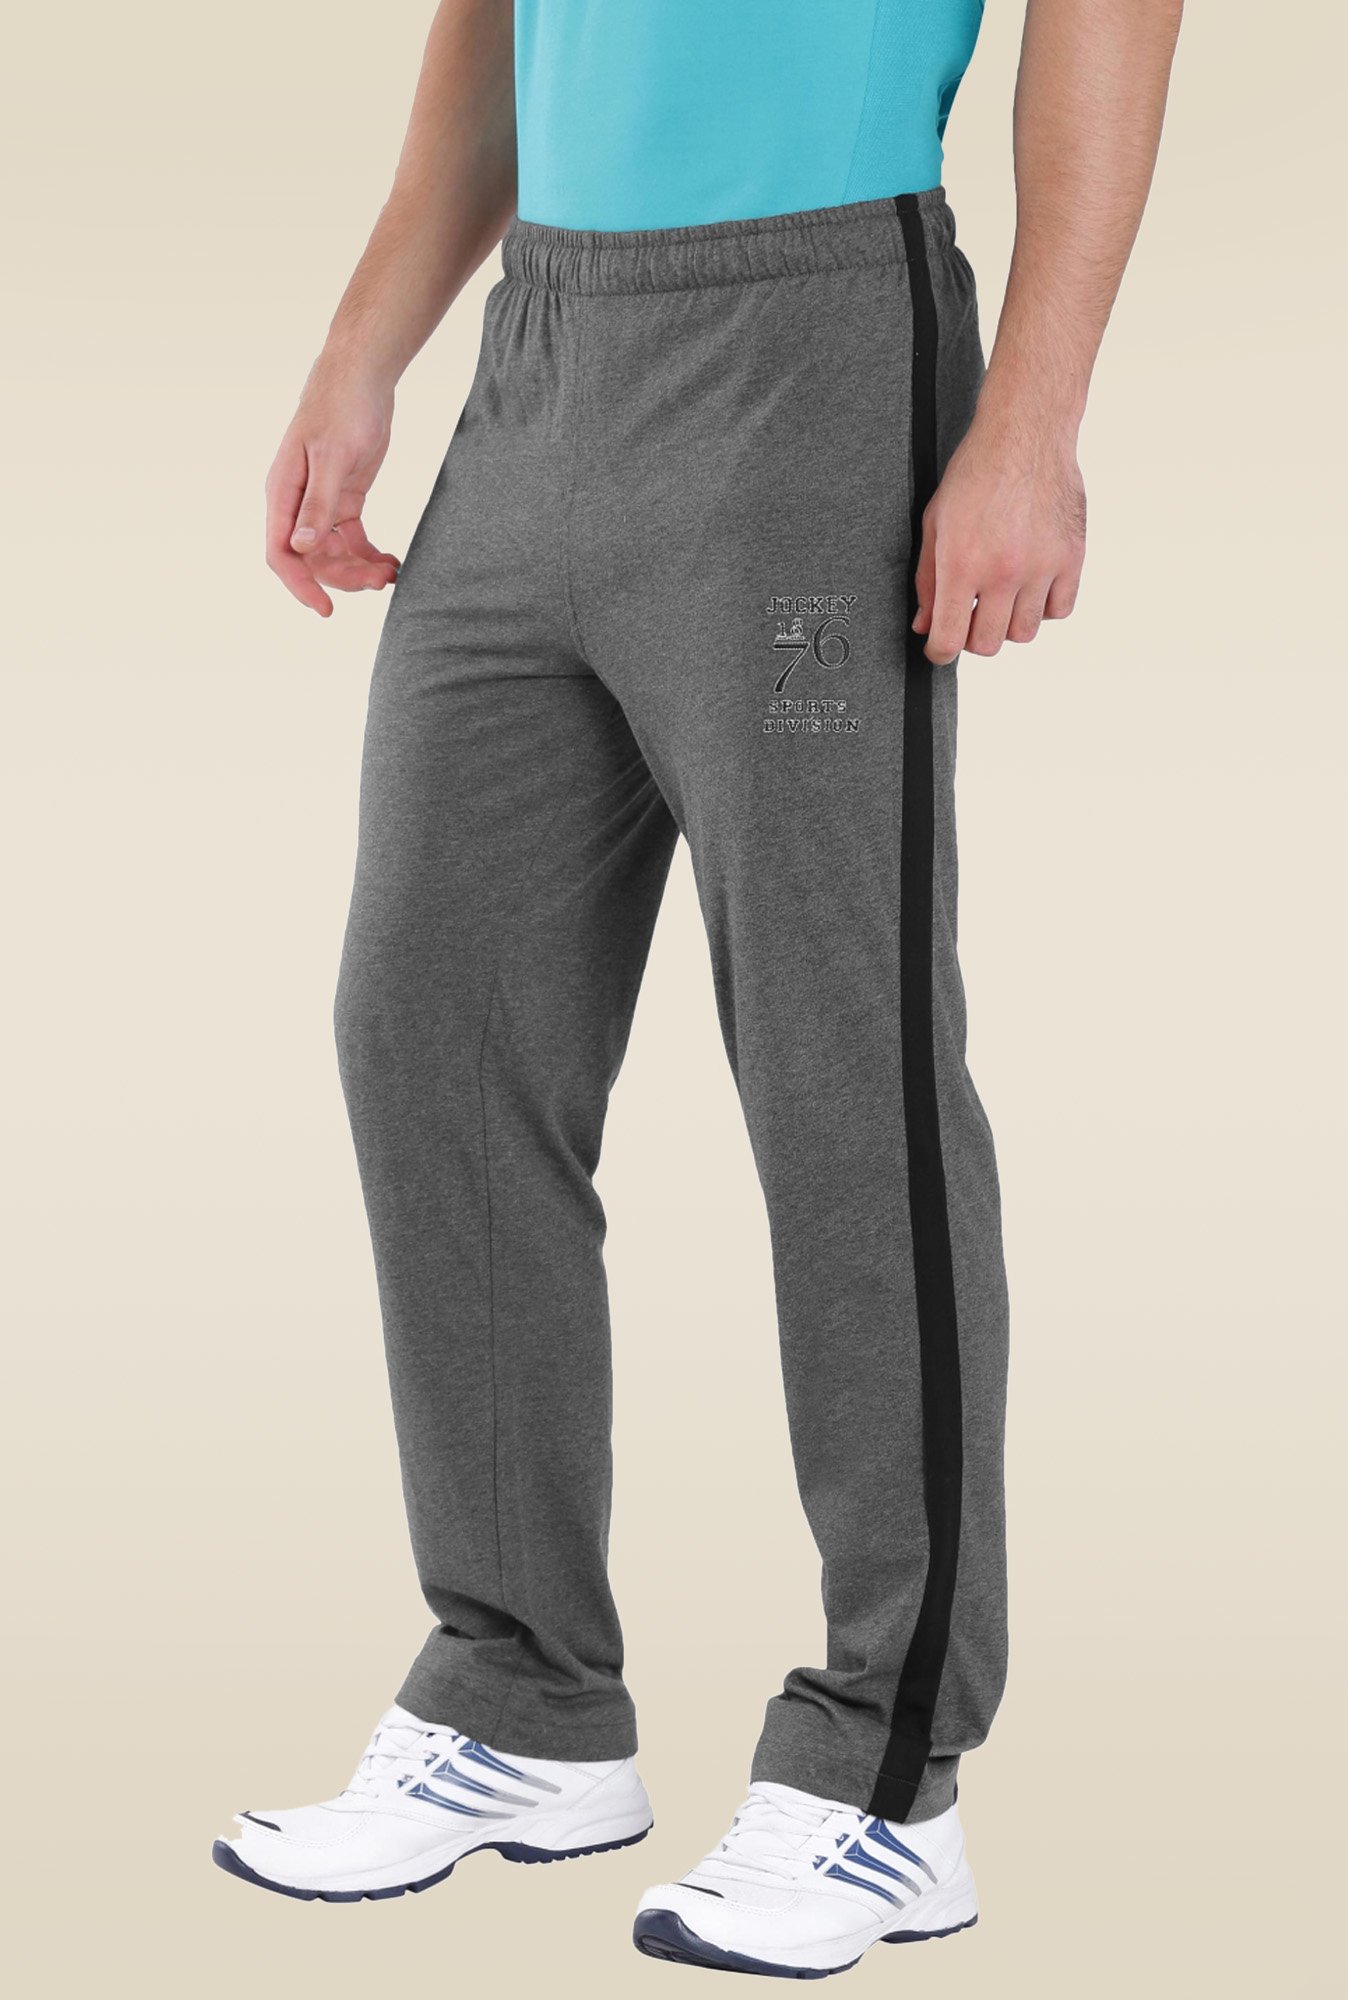 Easy 24X7 Cotton TrackPants (Pack of 2)– Almo Wear